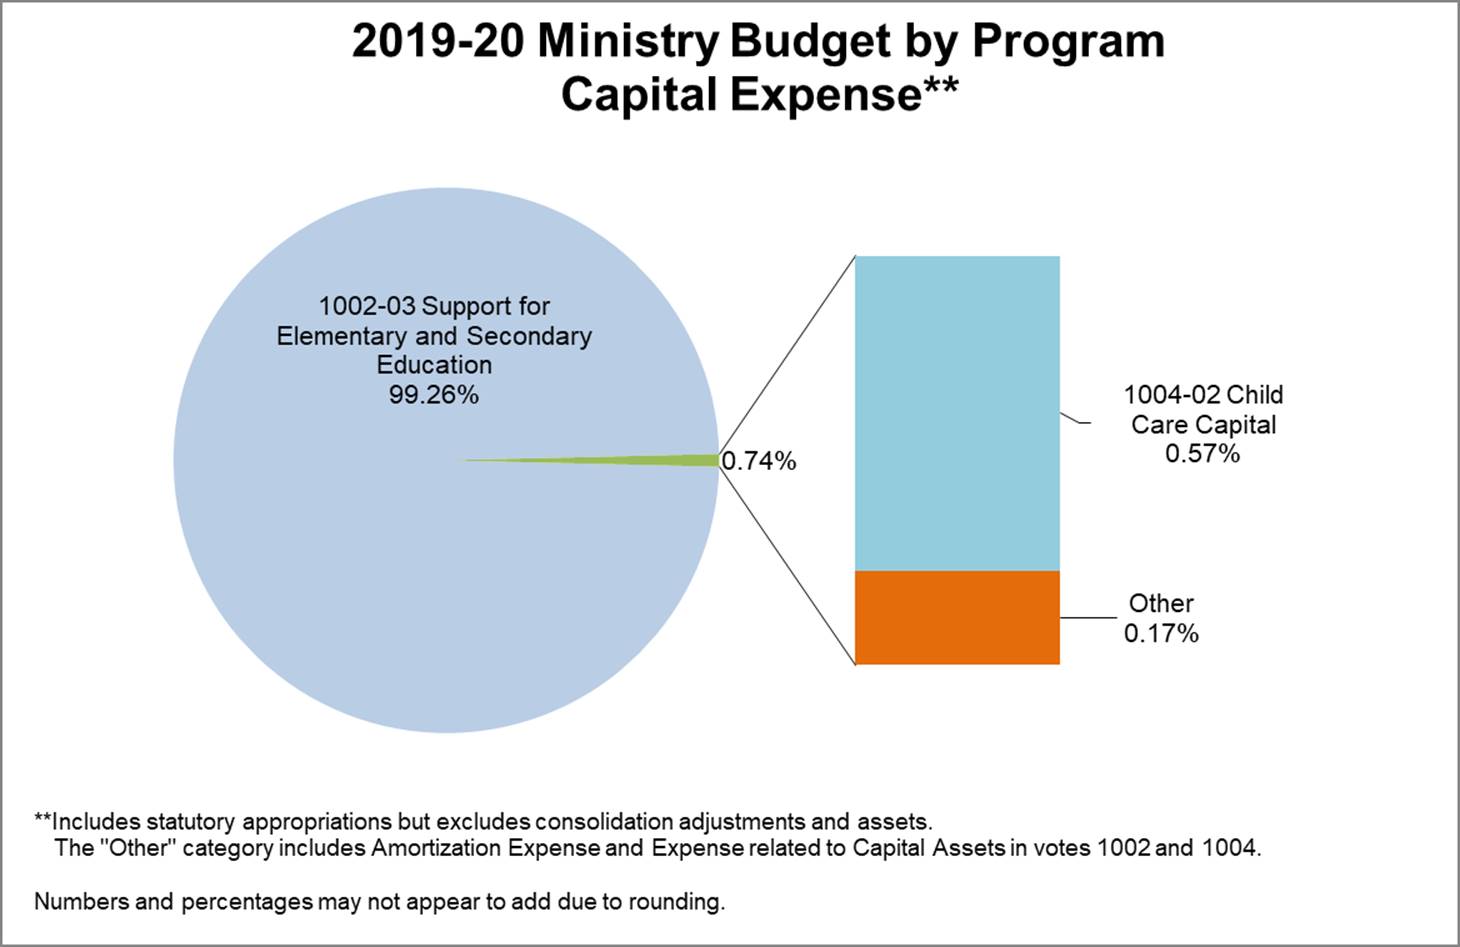 Pie Chart: 1002-03 Support for Elementary and Secondary Education 99.26%, and Other 0.74% (1004-02 Child Care Capital 0.57%; and Other 0.17%).